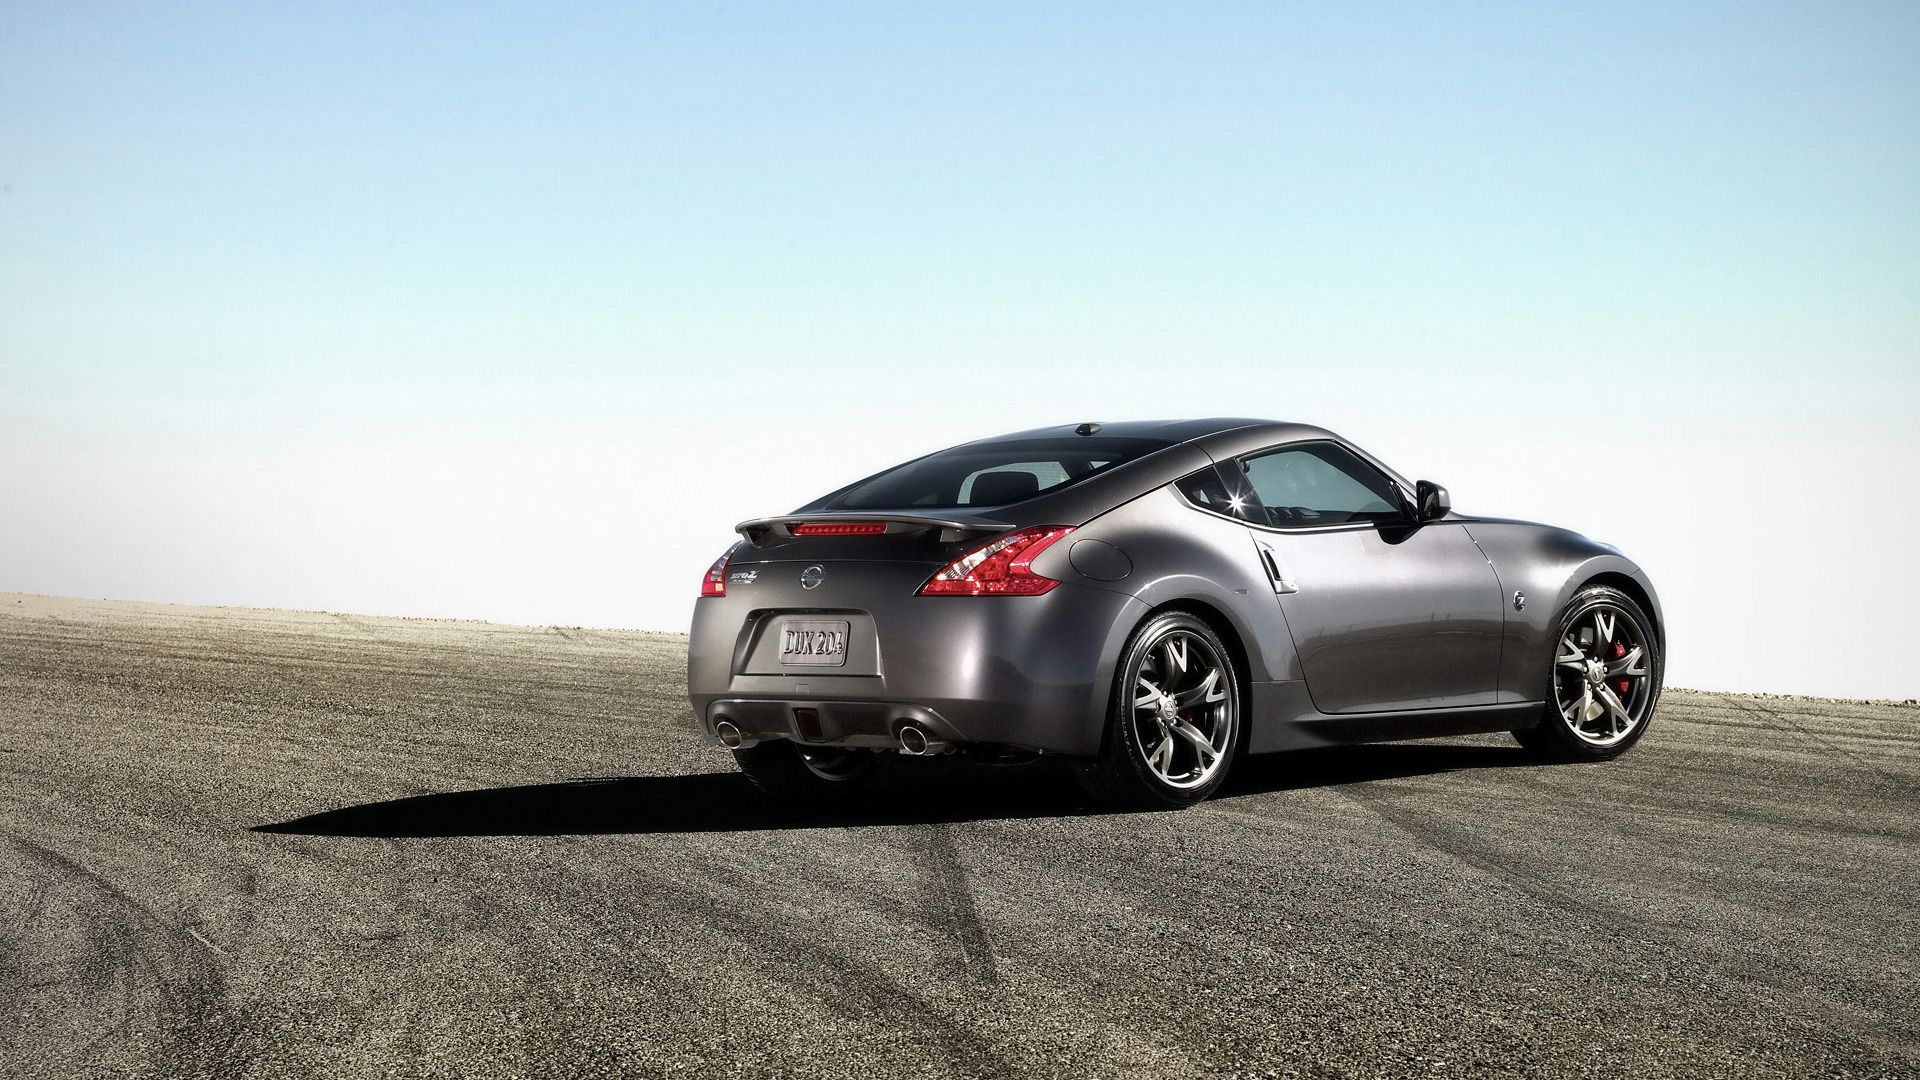 Awesome Nissan Car 1920X1080 Pixels Full HD Wallpaper Pack Cars